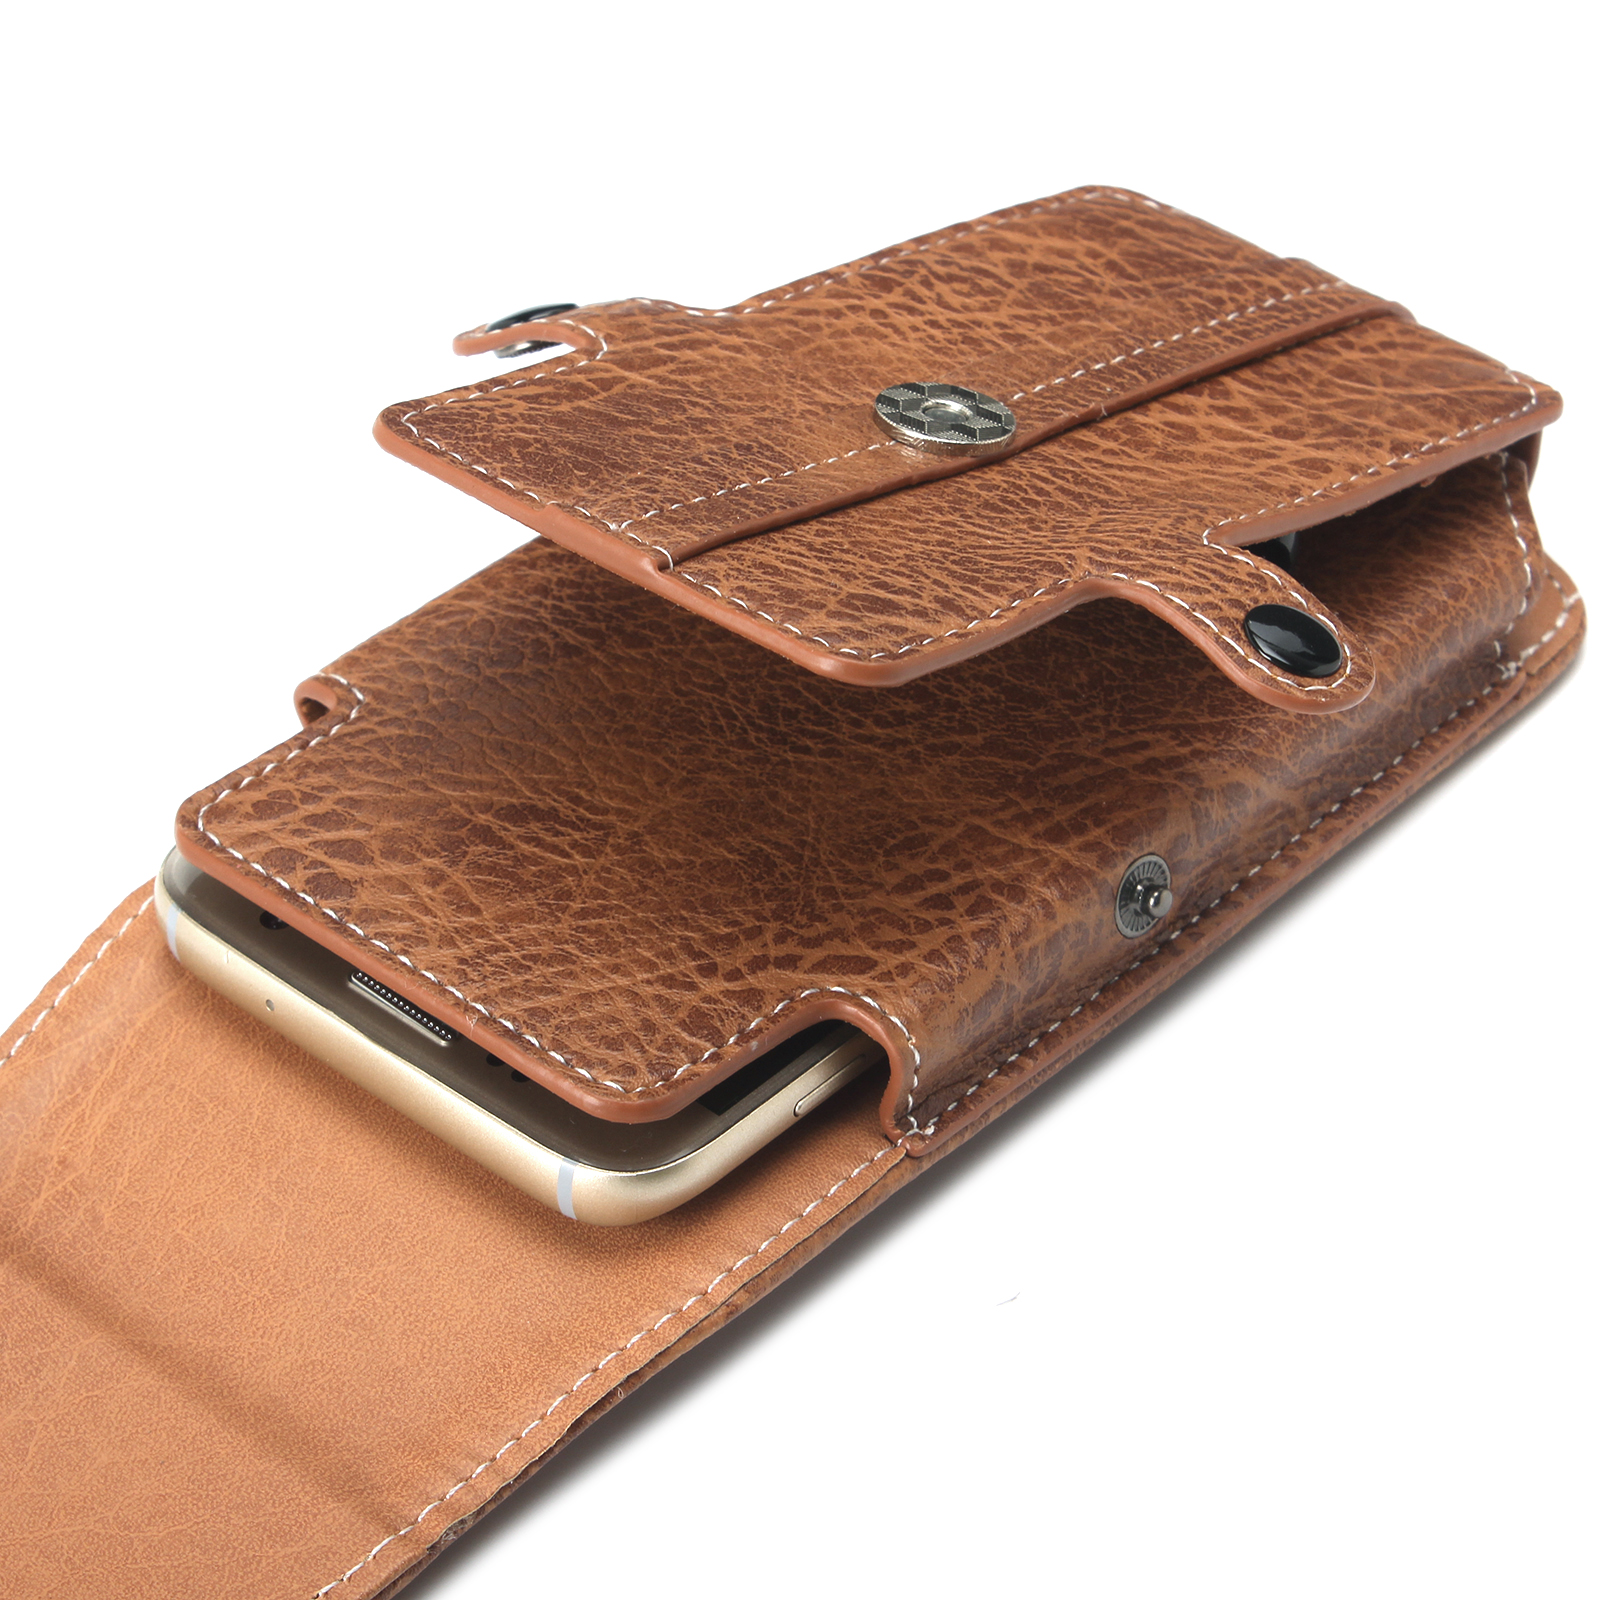 Bakeey-Casual-Vintage-Bussiness-64-inch-Vertical-Multi-Pocket-Multi-Card-Slot-PU-Leather-Mobile-Phon-1692765-9